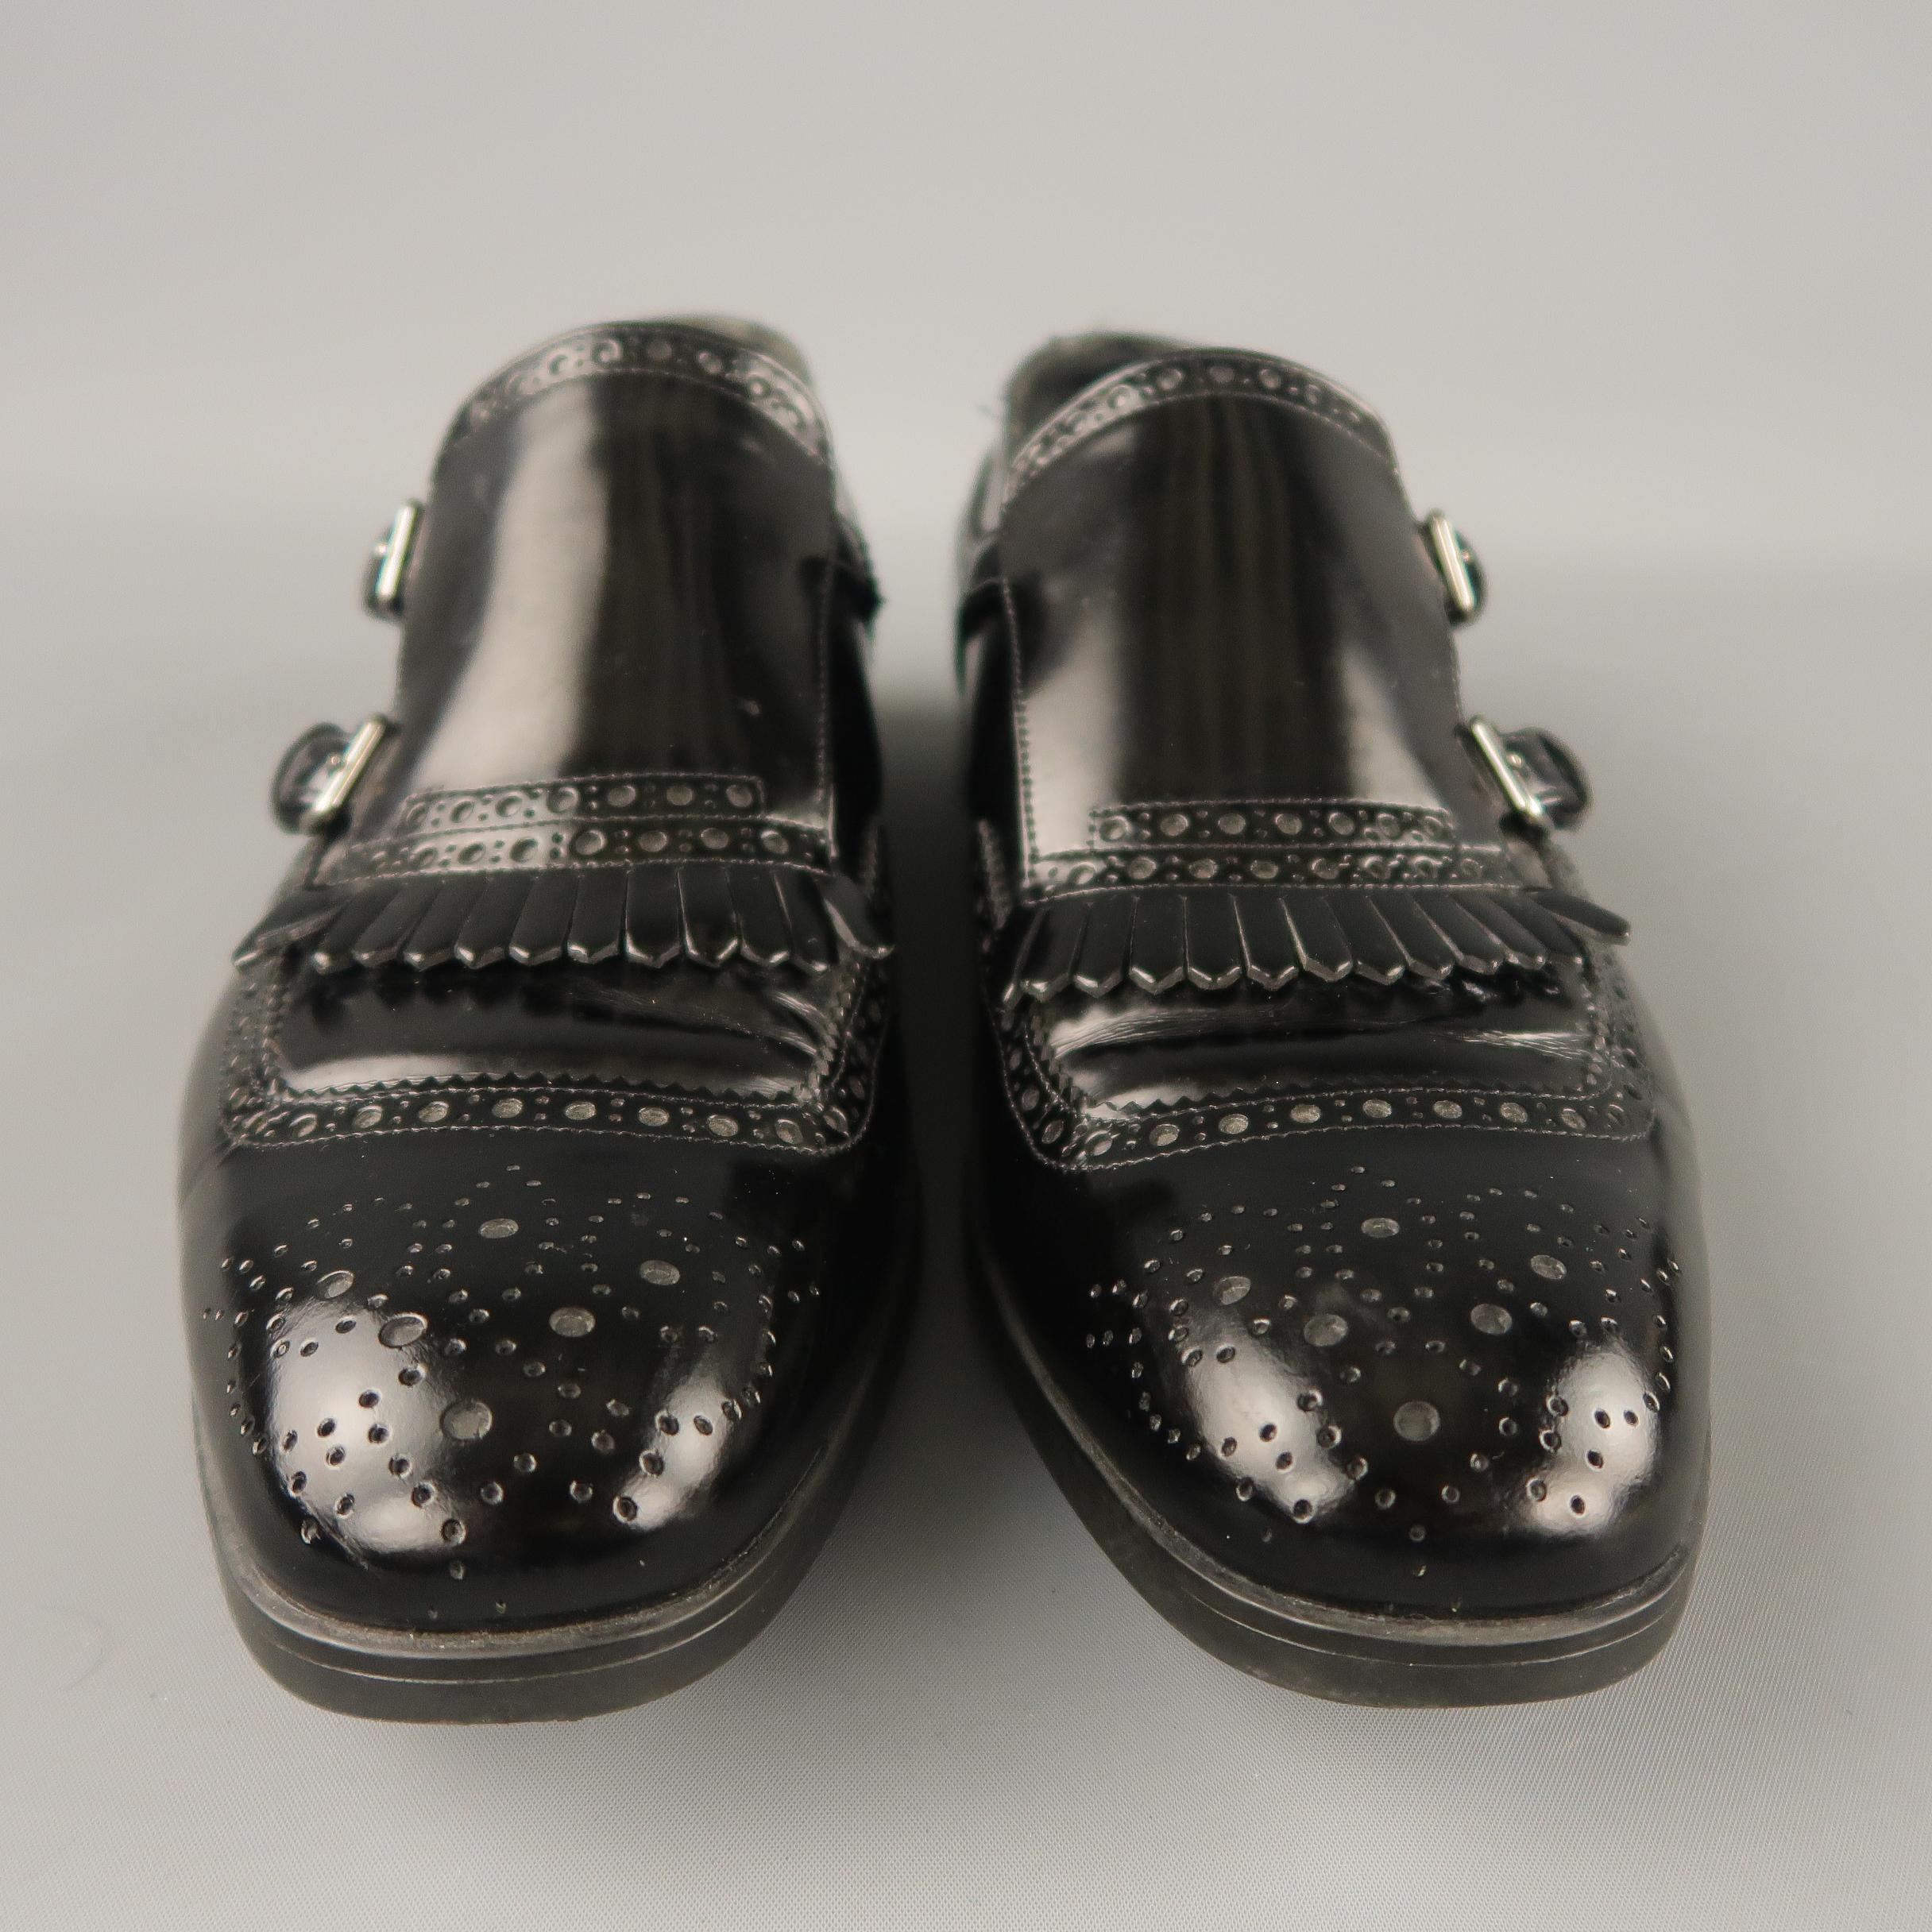 PRADA loafers come in a black leather featuring a double monk strap and a heeled rubber sole. Made in Italy.
 
Excellent Pre-Owned Condition.
Marked: 6.5
 
Measurements:
 
Width: 4.1 in.
Length: 12.6 in.